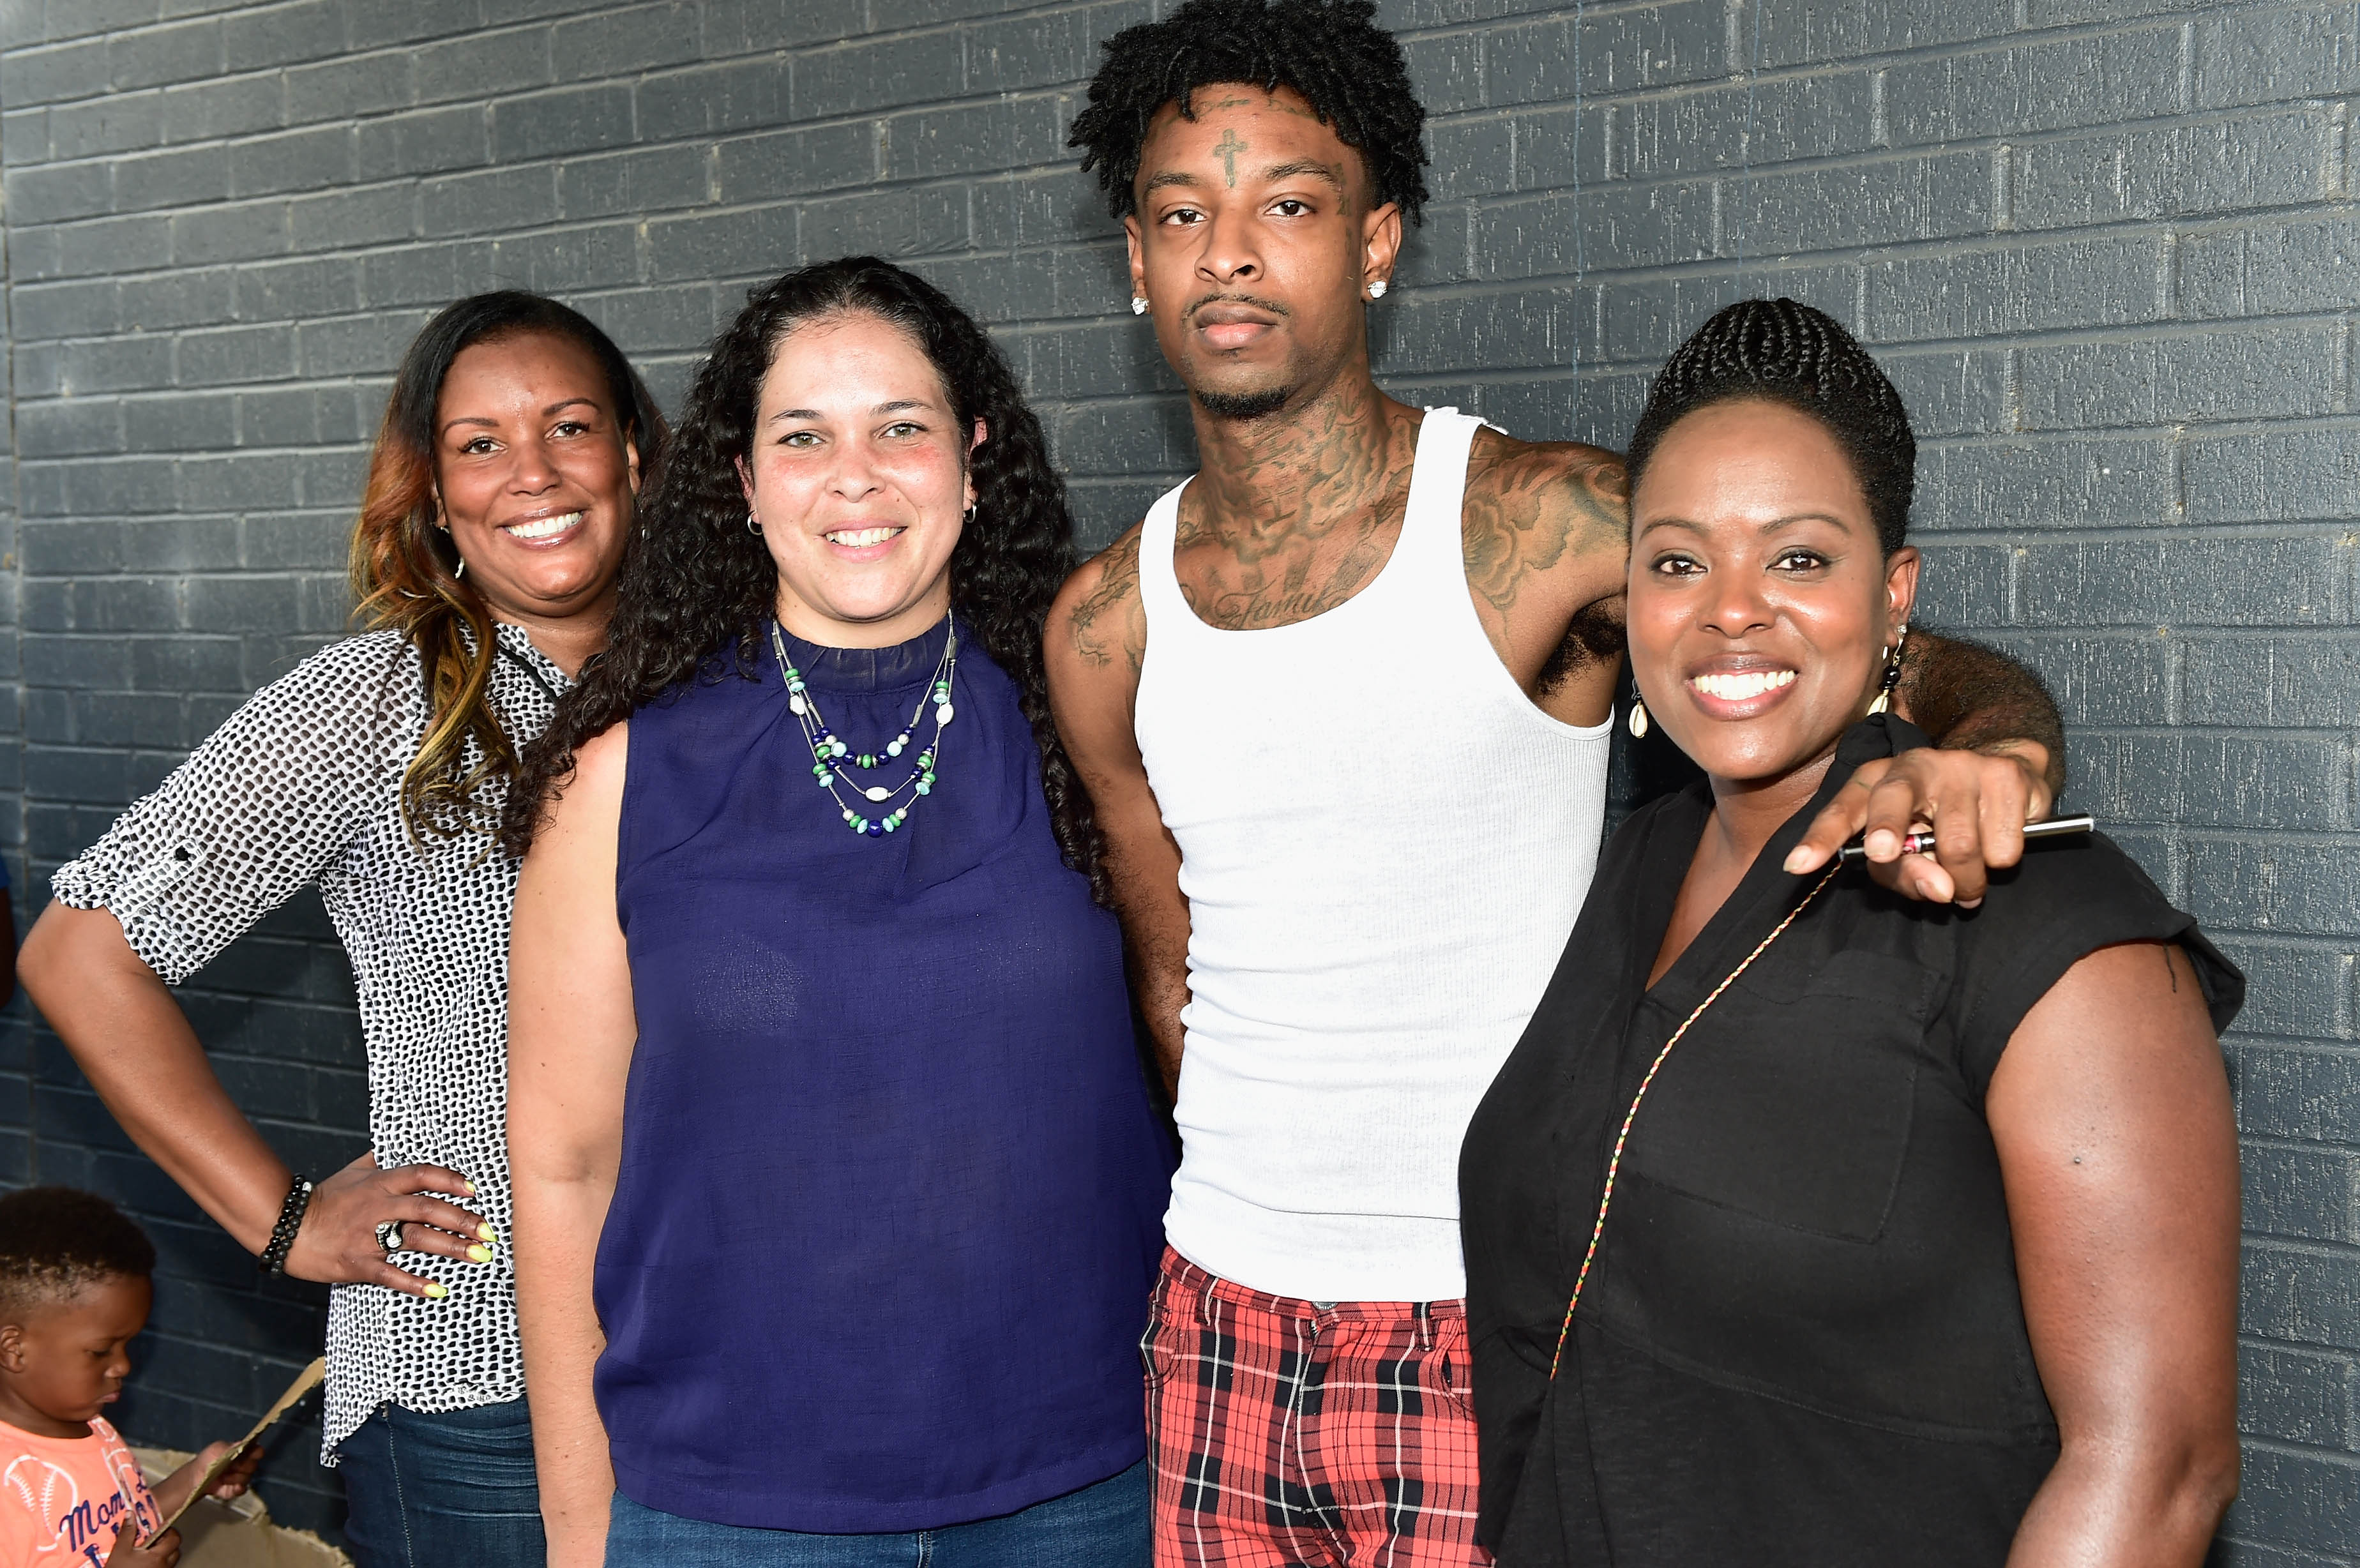 21 Savage Hosting Issa Back to School Drive Event For Third Year